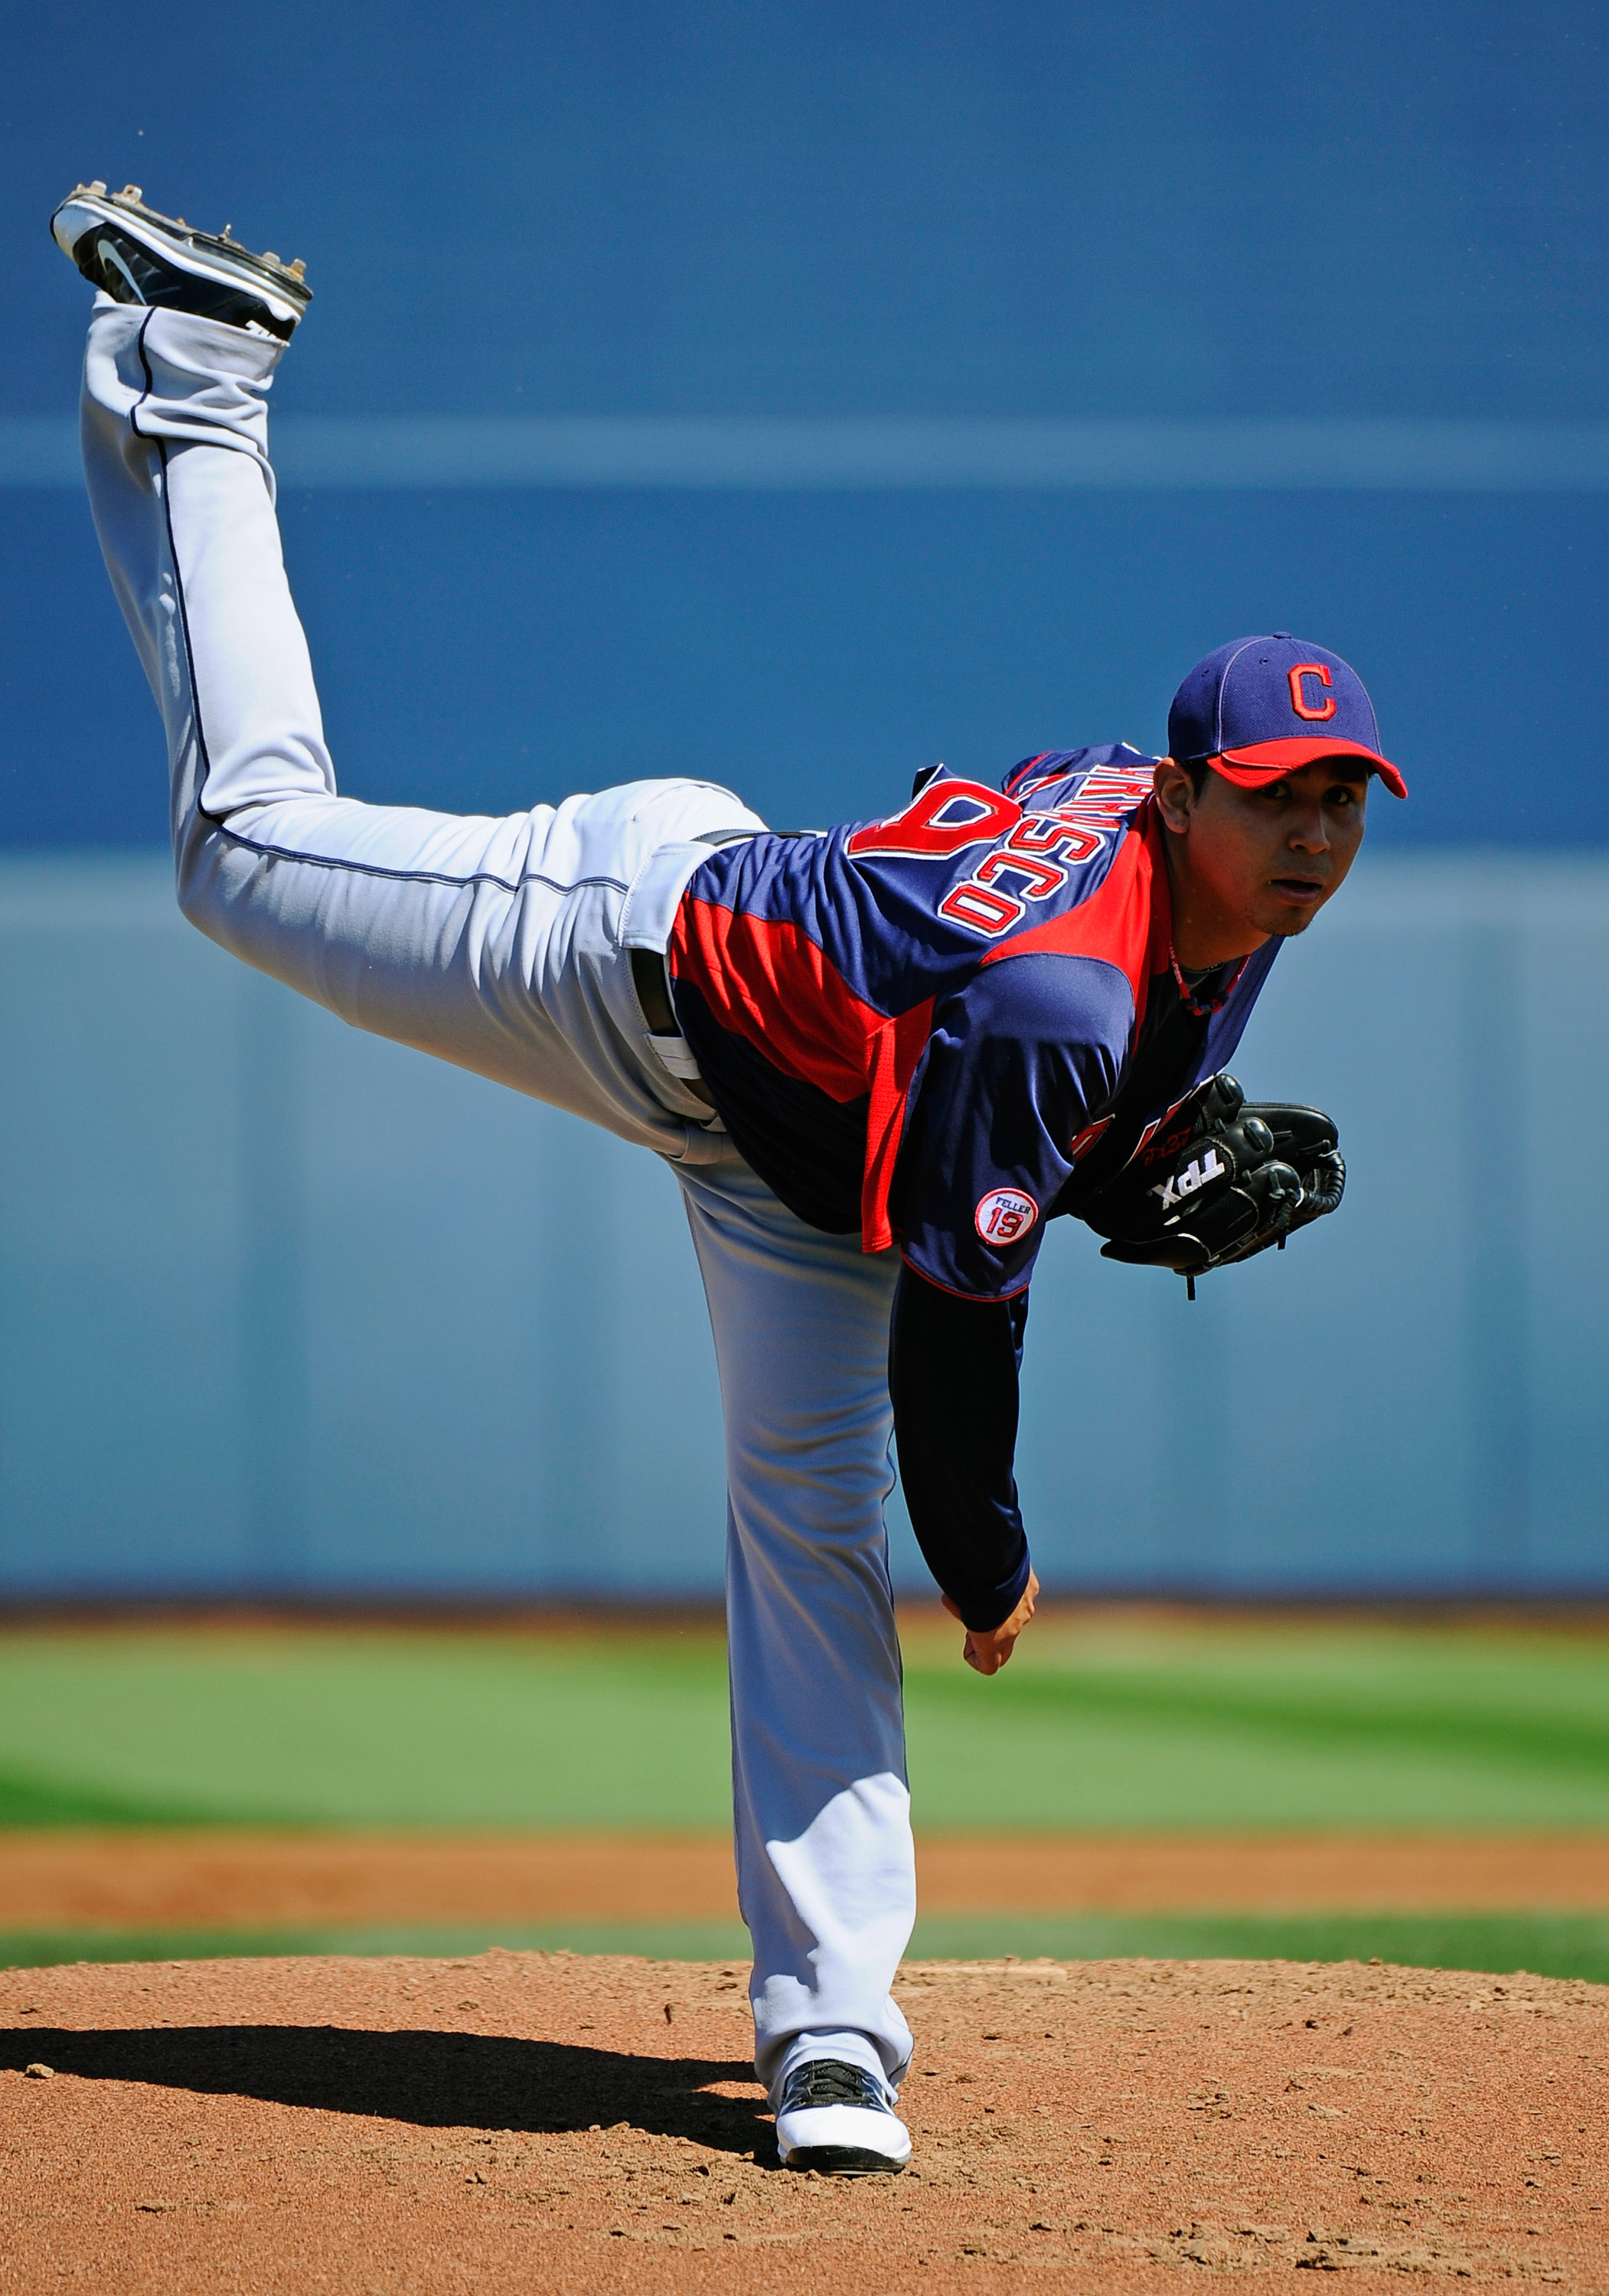 PEORIA, AZ - MARCH 13:  Pitcher Carlos Carrasco #59 of the Cleveland Indians throws a pitch against the San Diego Padres during the spring training baseball game at Peoria Stadium on March 13, 2011 in Peoria, Arizona.  (Photo by Kevork Djansezian/Getty Im